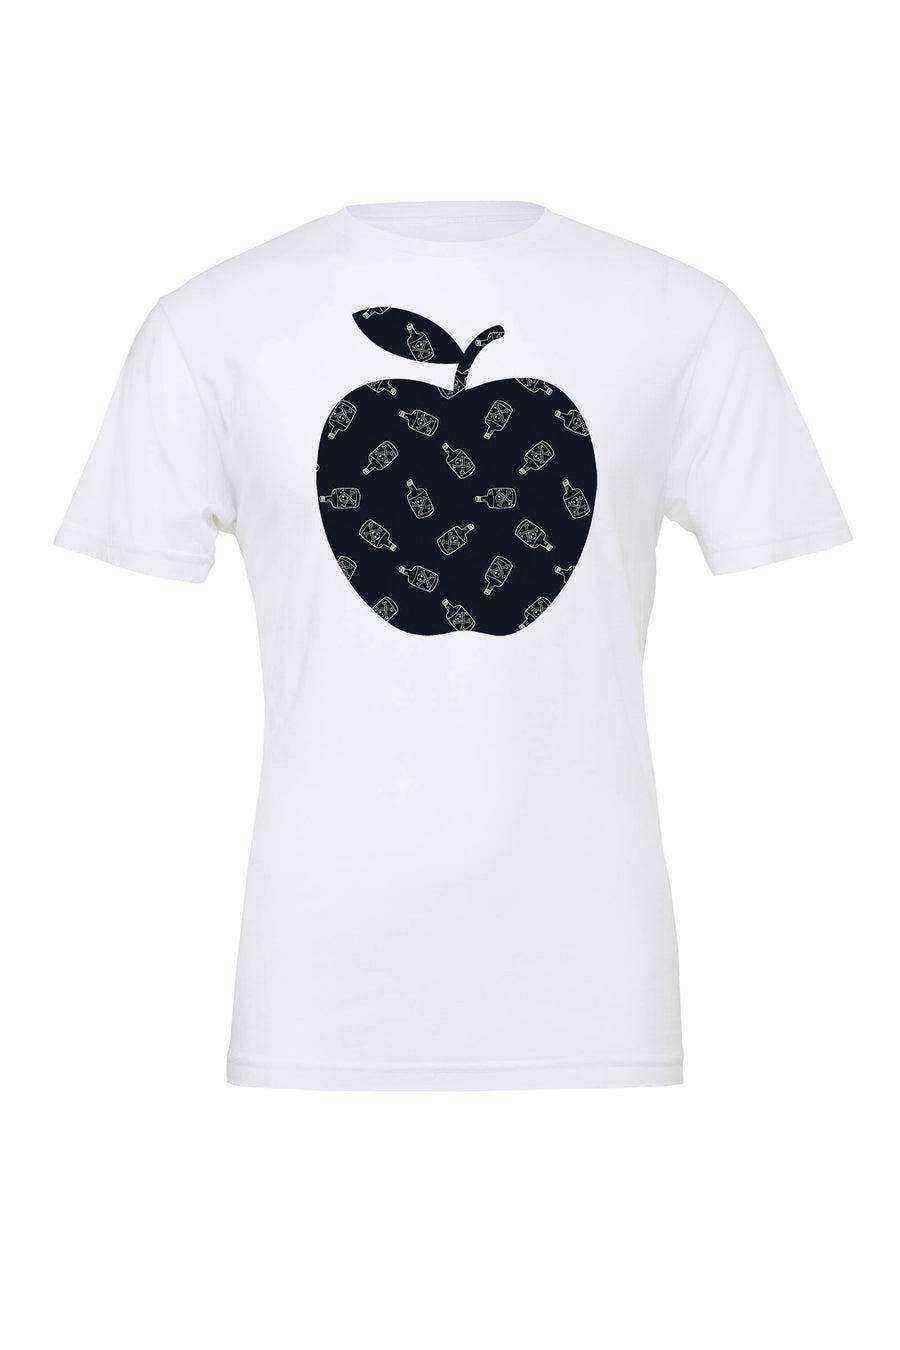 Youth | Poison Apple Shirt | Snow White Shirt - Dylan's Tees